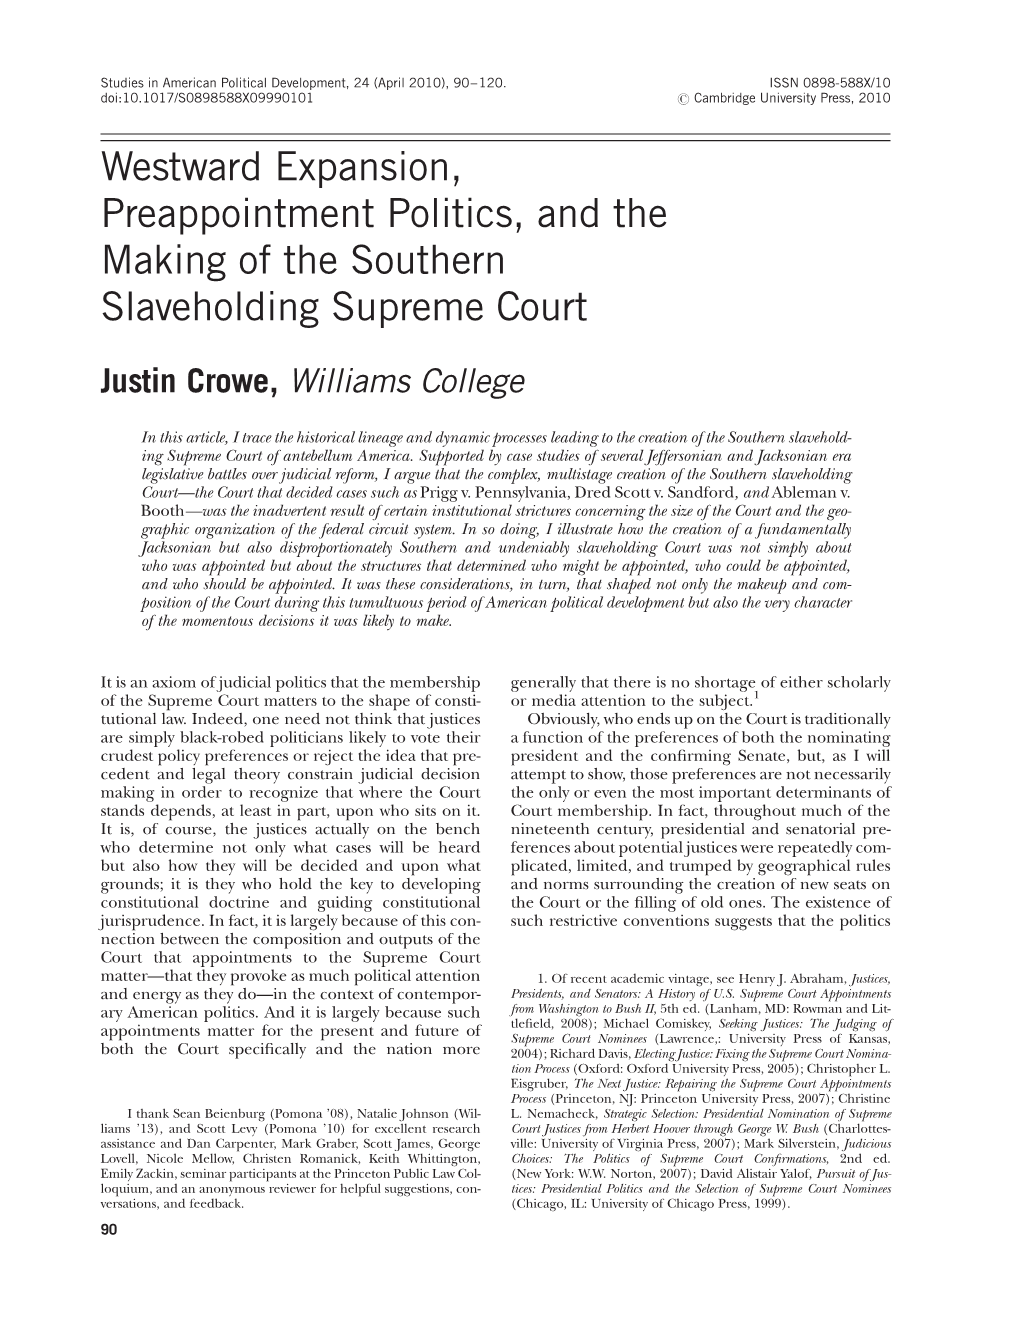 Westward Expansion, Preappointment Politics, and the Making of the Southern Slaveholding Supreme Court